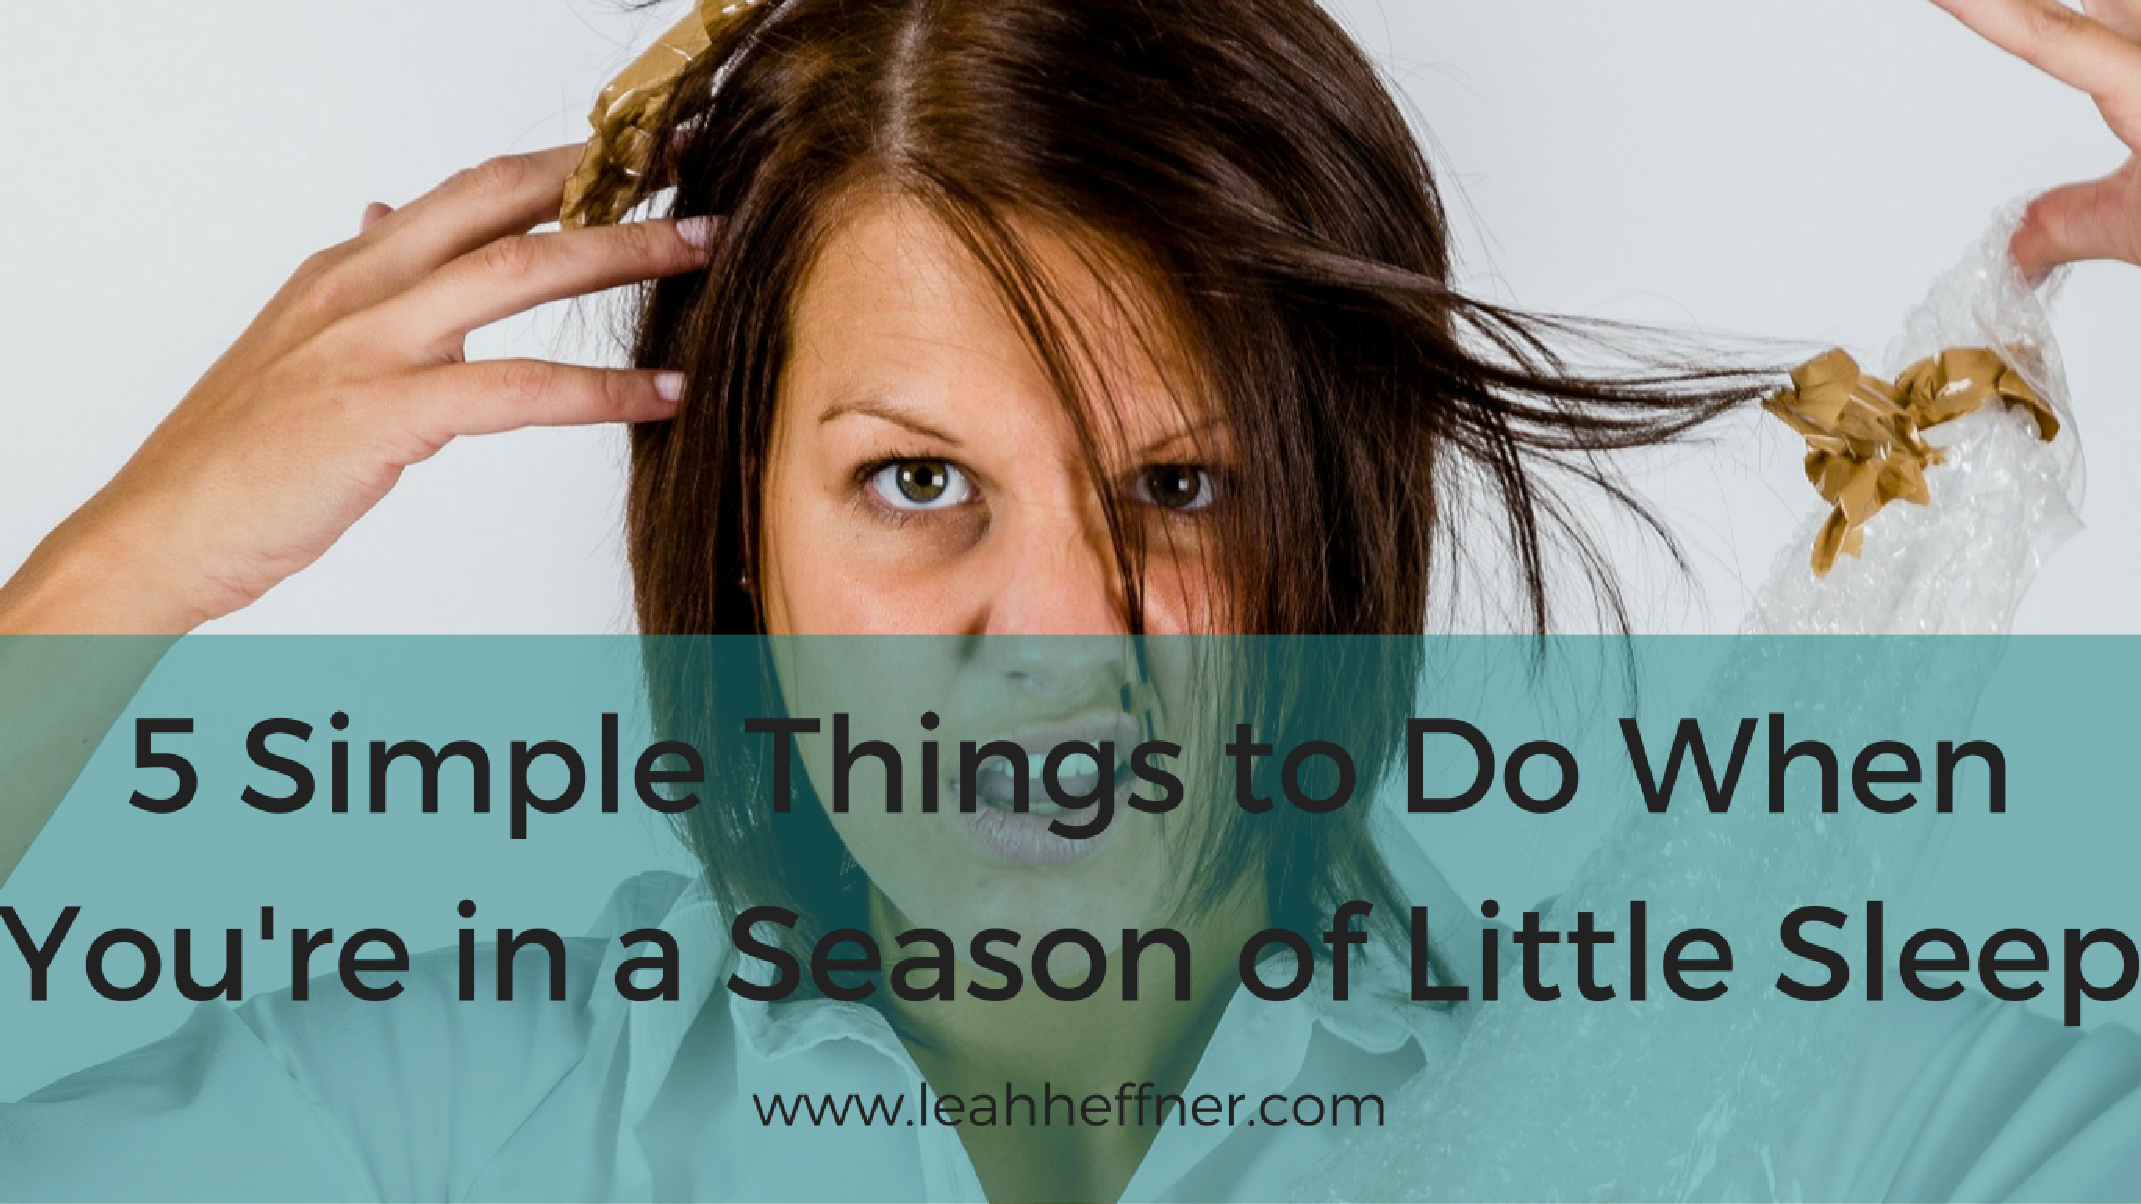 5 Simple Things to Do When You're in a Season of Little Sleep - Life Around the Coffee Cup - www.leahheffner.com